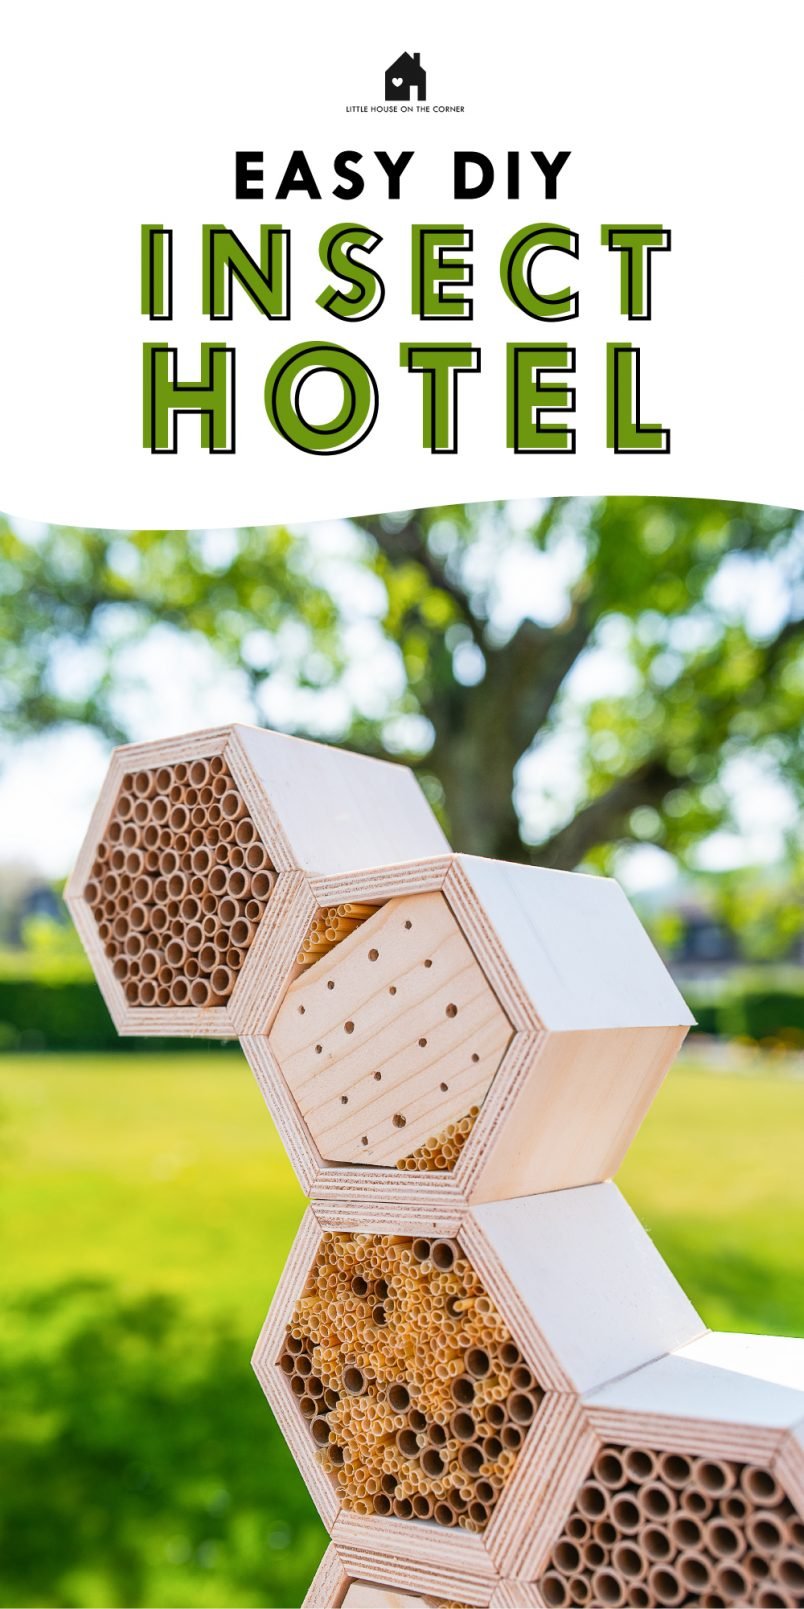 Easy DIY Insect Hotel